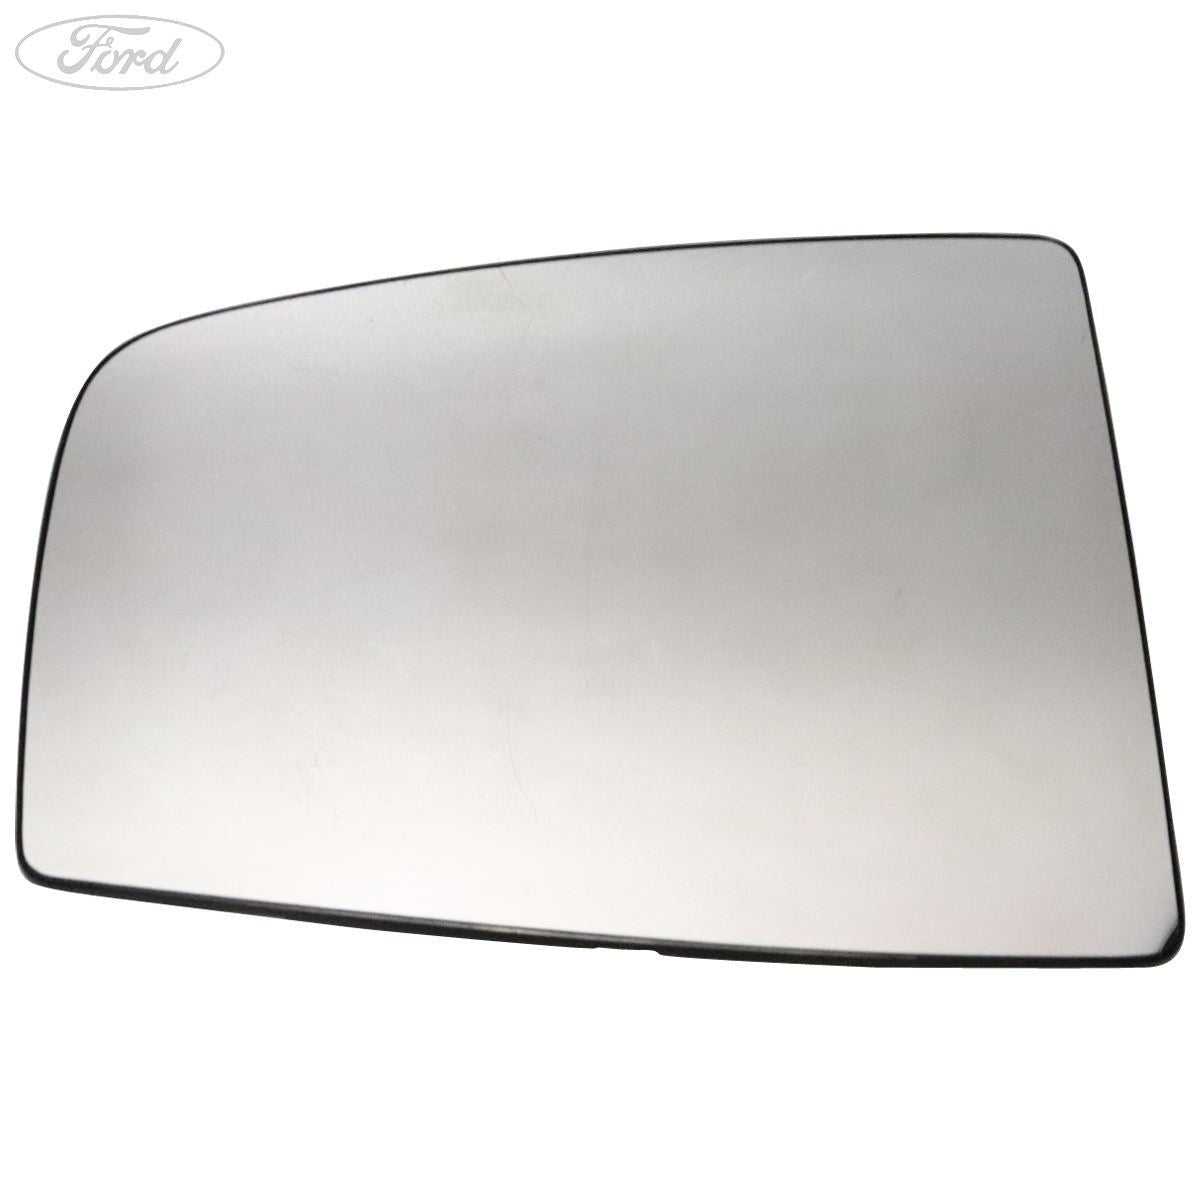 Ford, TRANSIT O/S WIDE ANGLE MIRROR GLASS POWER FOLD BACK